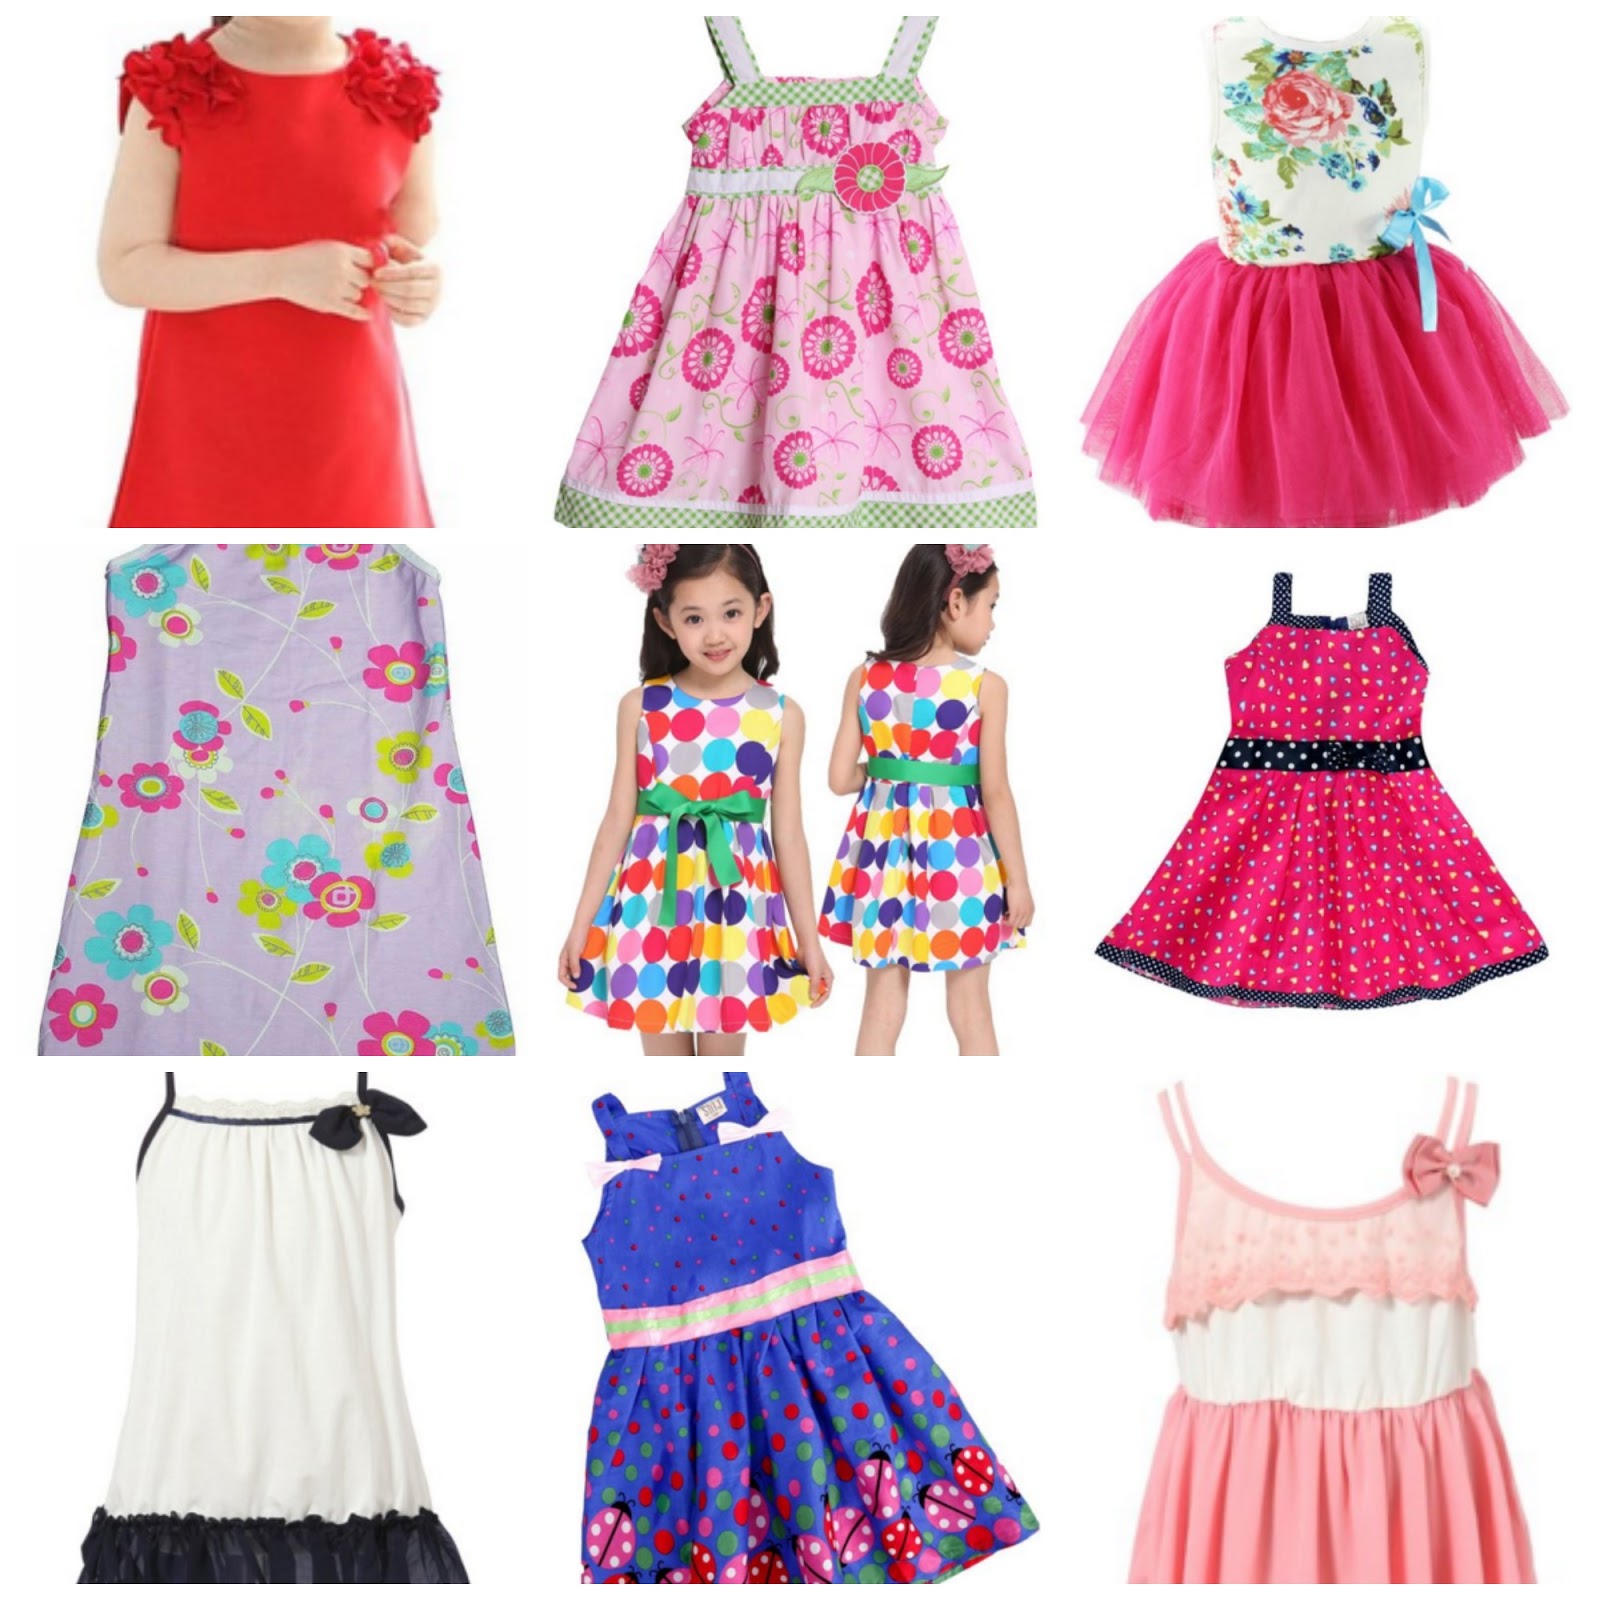 Buy > clothes for girls amazon > in stock